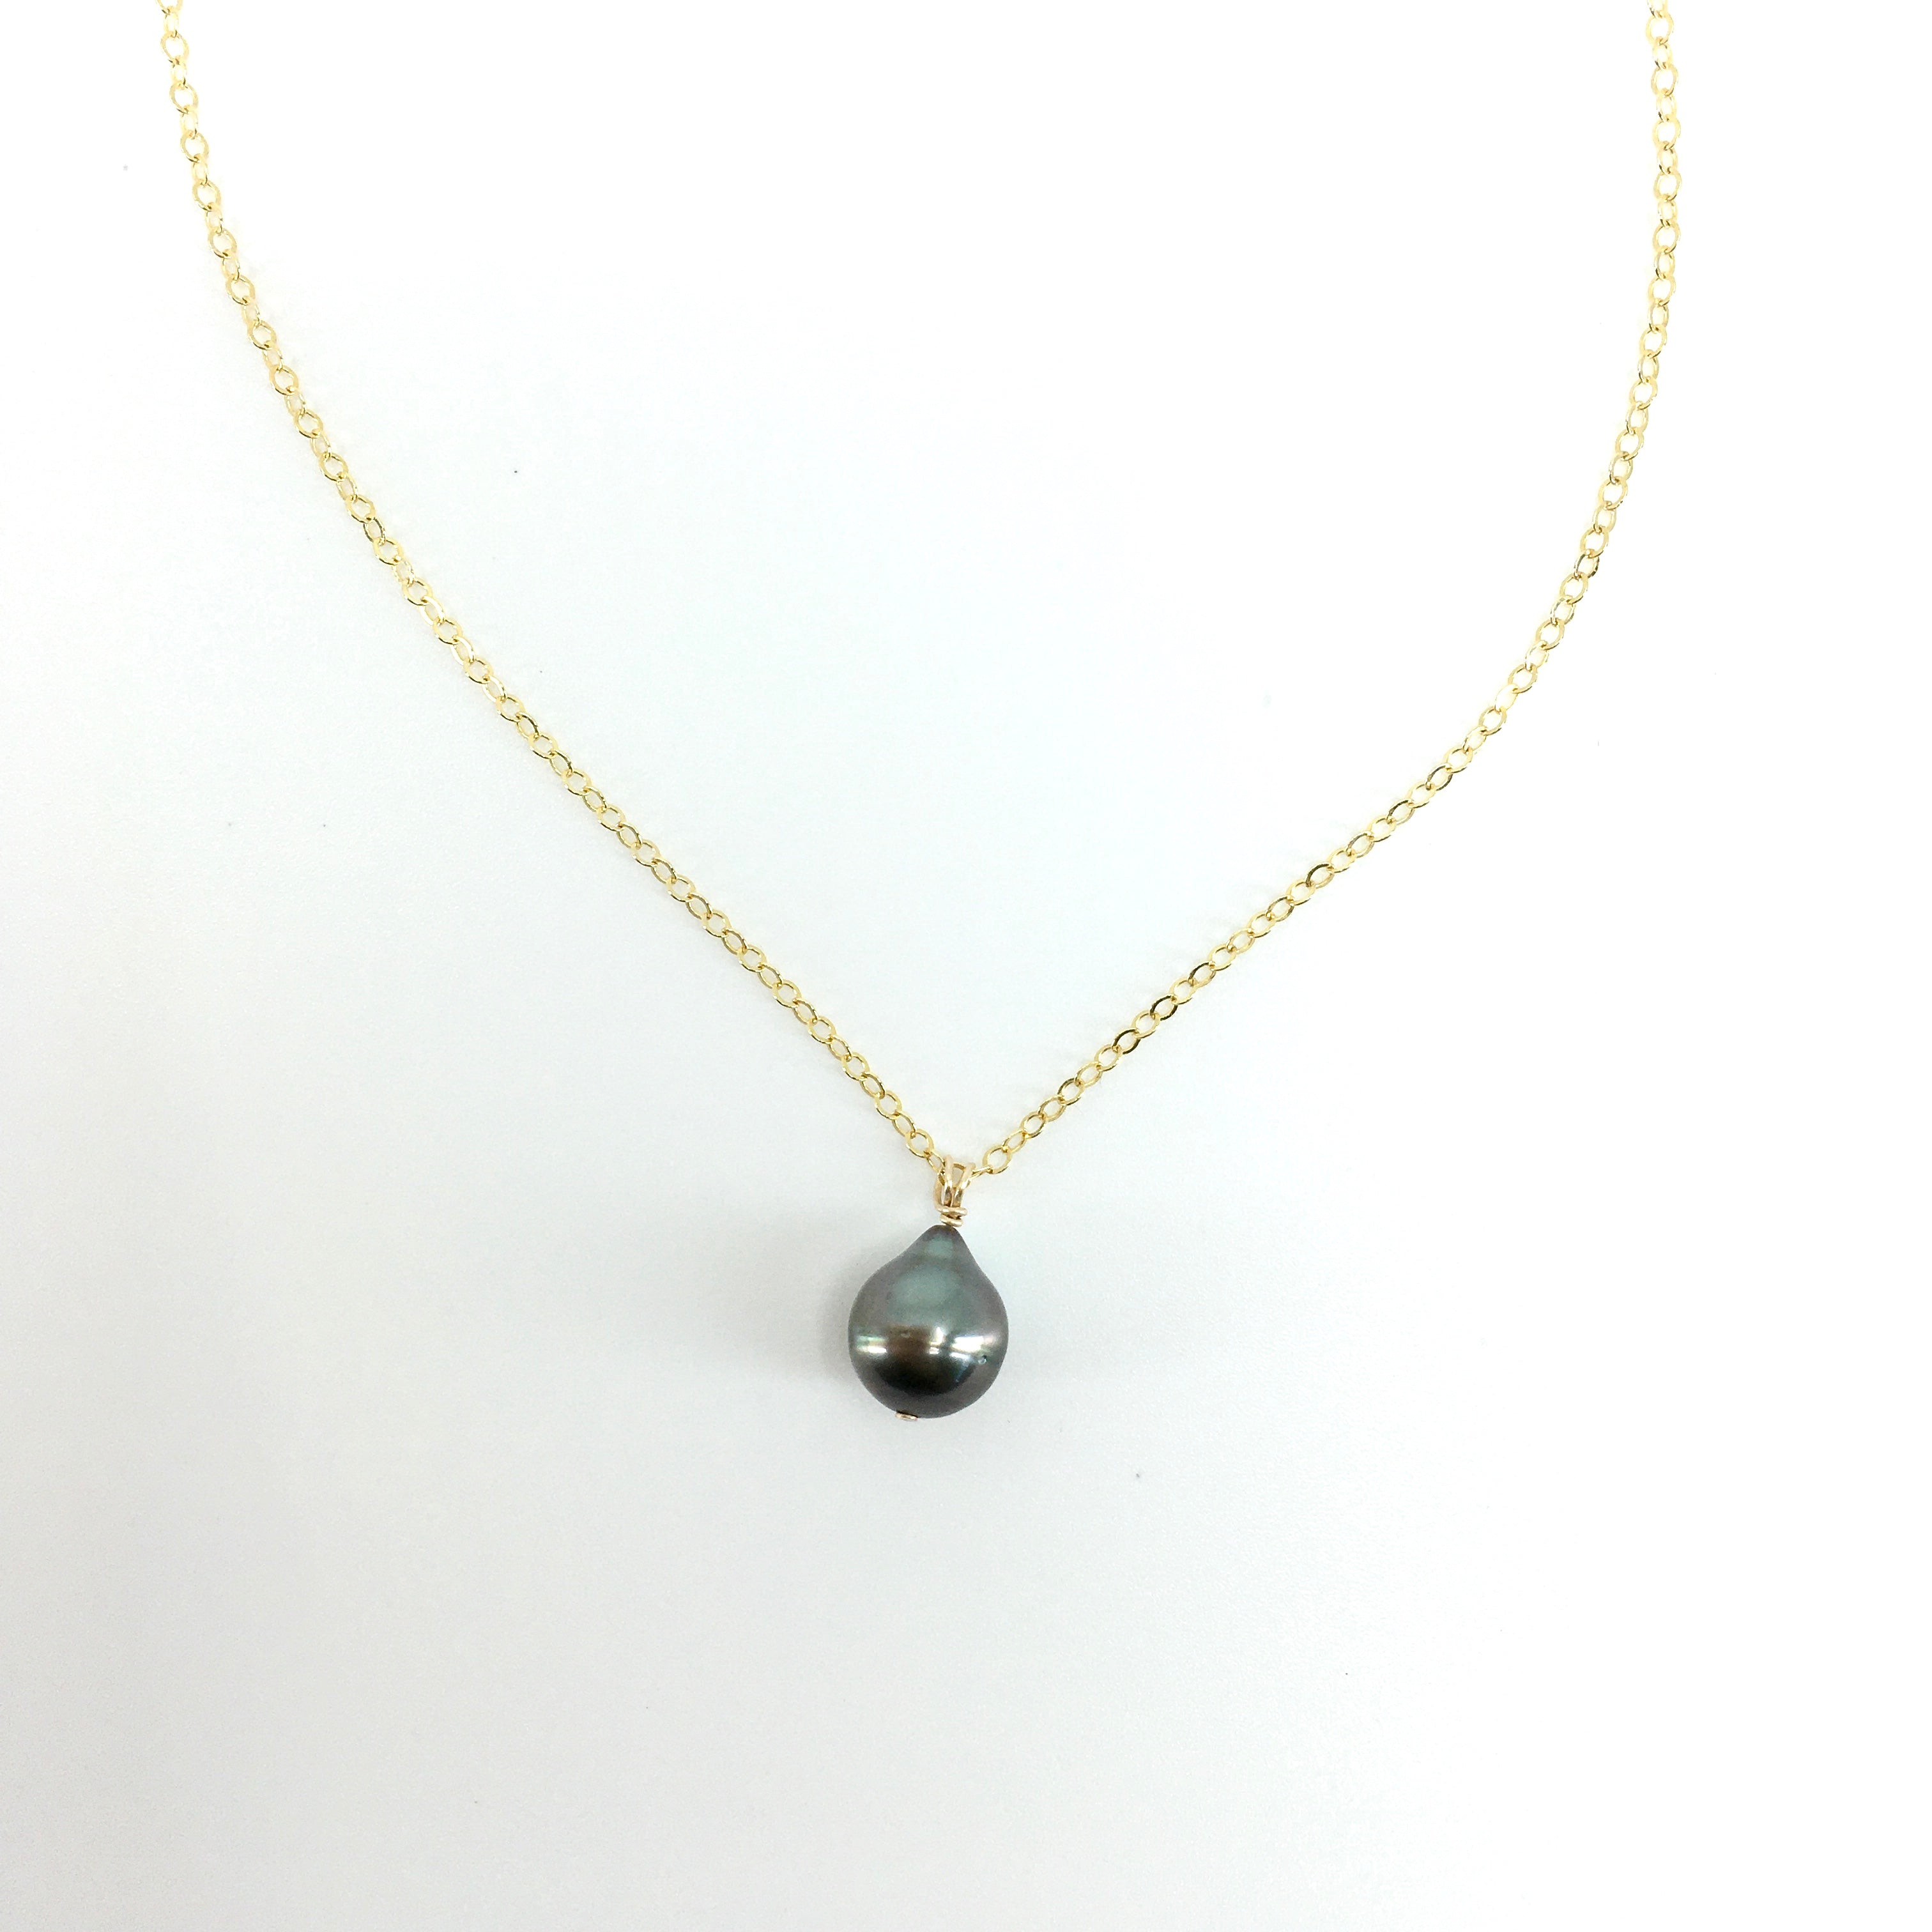 10-13mm Black Cultured Tahitian Pearl Necklace with 14kt White Gold |  Ross-Simons